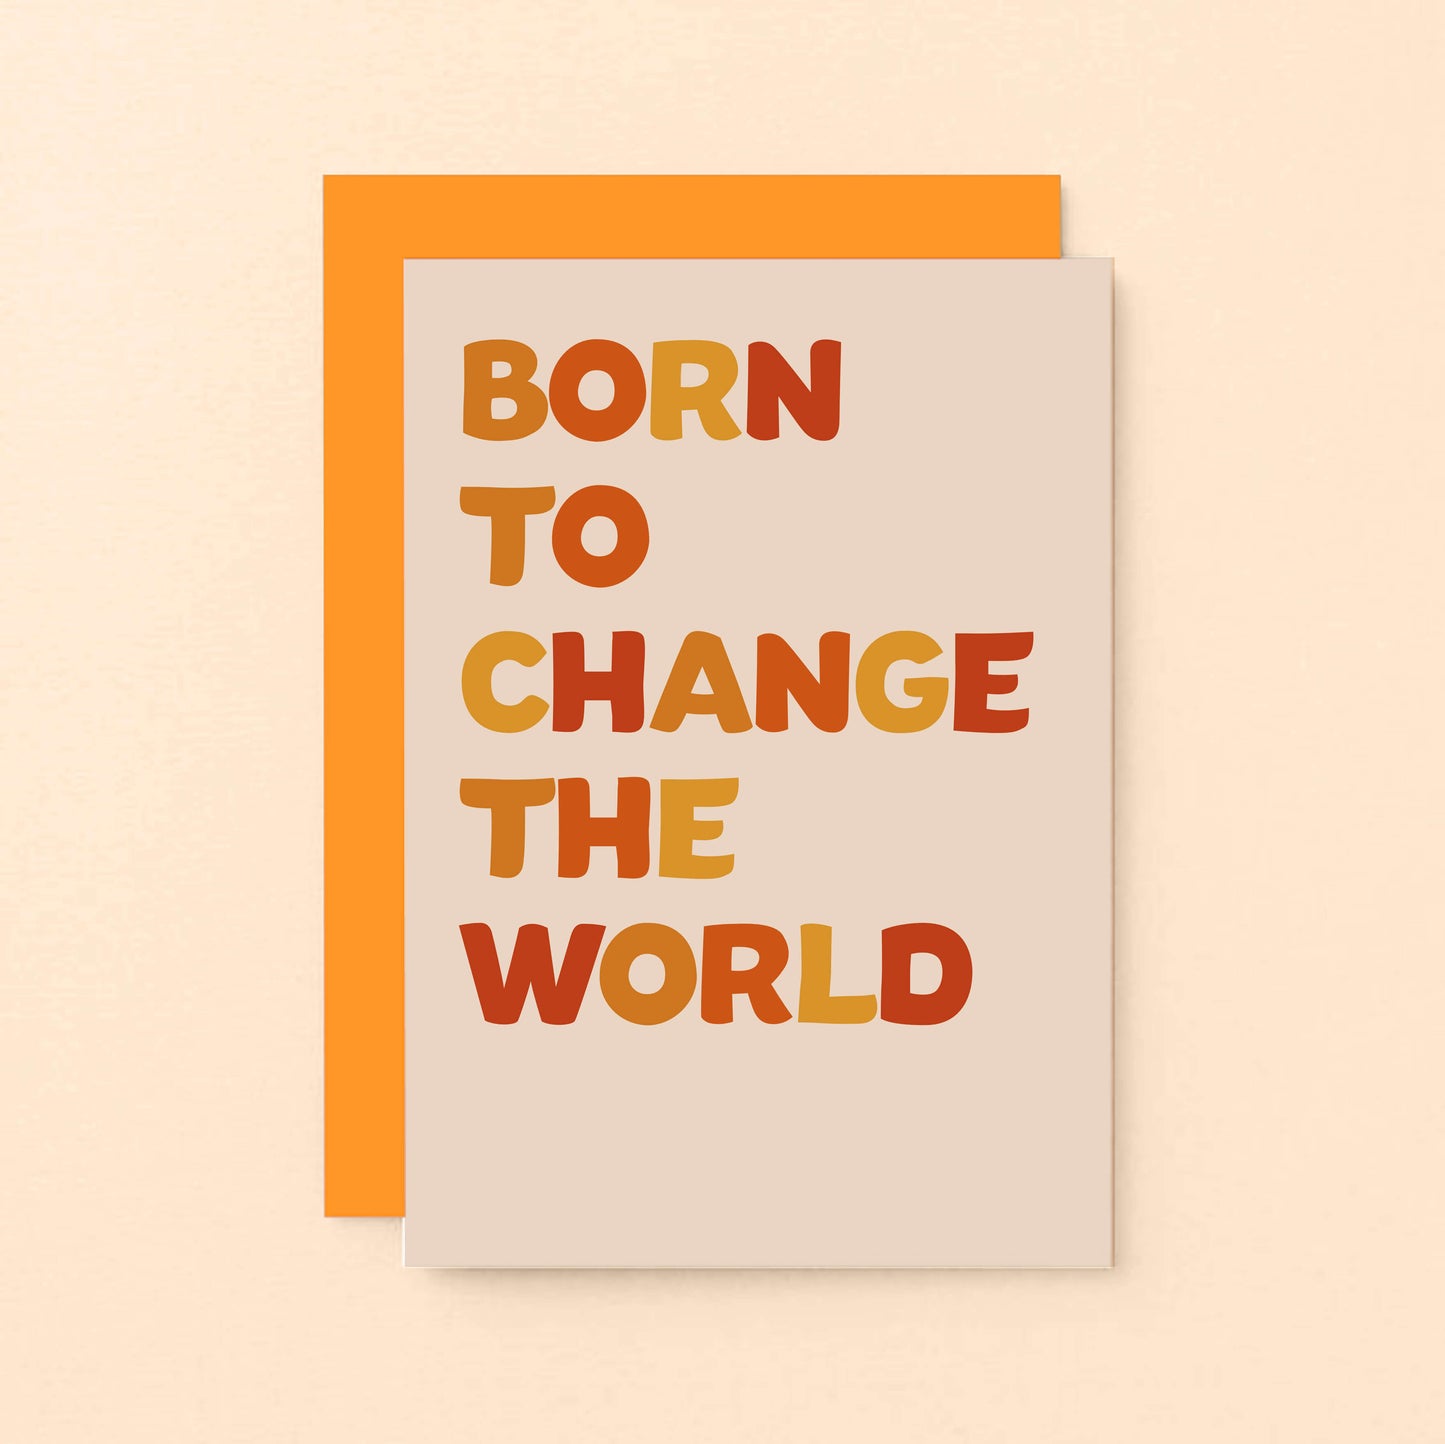 Born To Change The World Card by SixElevenCreations. Product Code SE0604A6